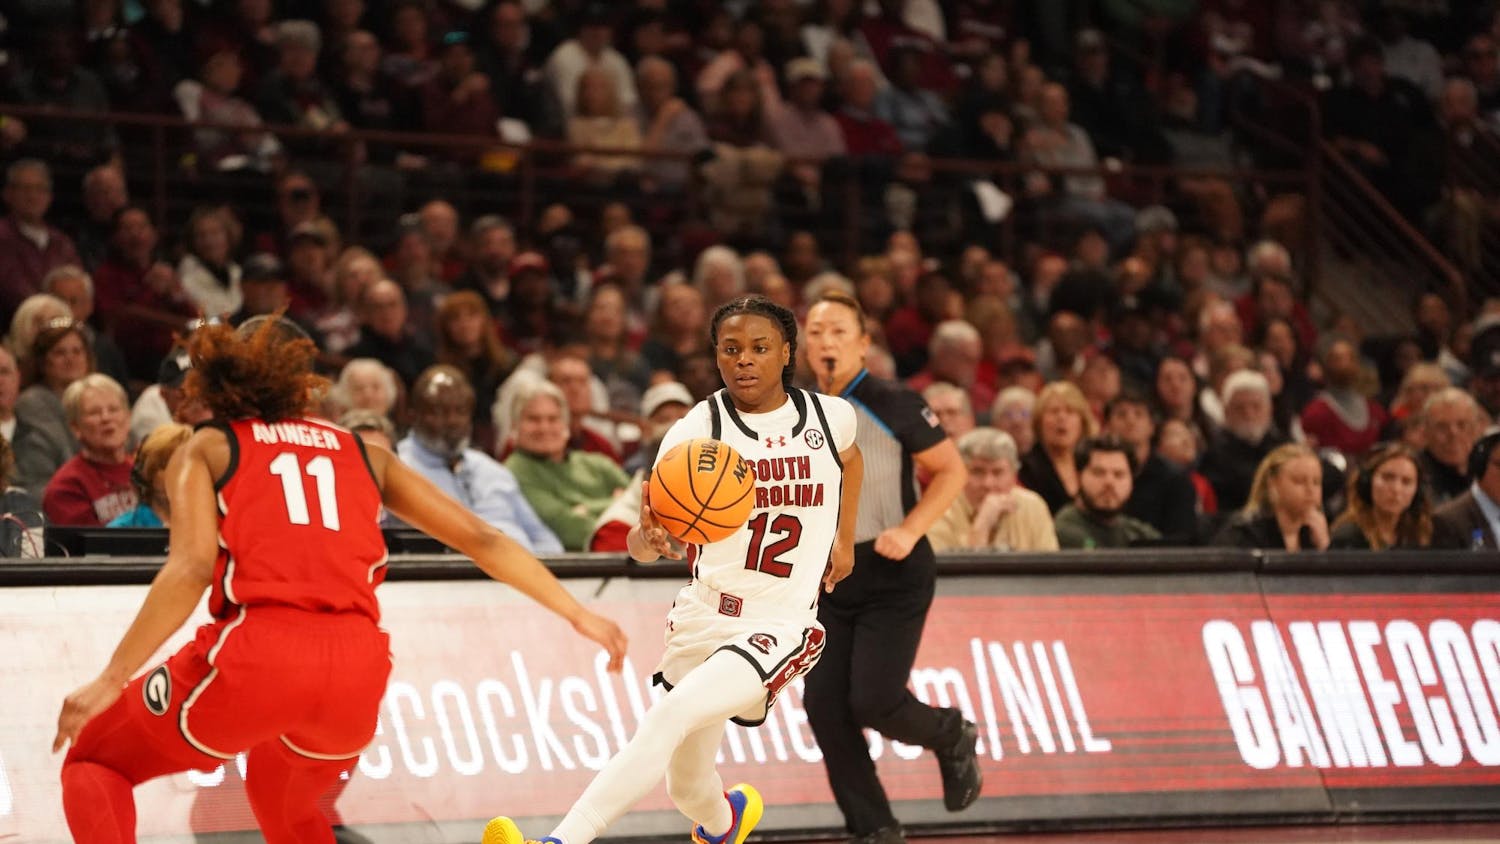 Freshman guard MiLaysia Fulwiley drives up the court during South Carolina's game against Georgia on Feb. 18, 2024, at Colonial Life Arena. Fulwiley scored 4 points in just over 15 minutes of playing time during the Gamecocks' 70-56 victory over the Bulldogs.